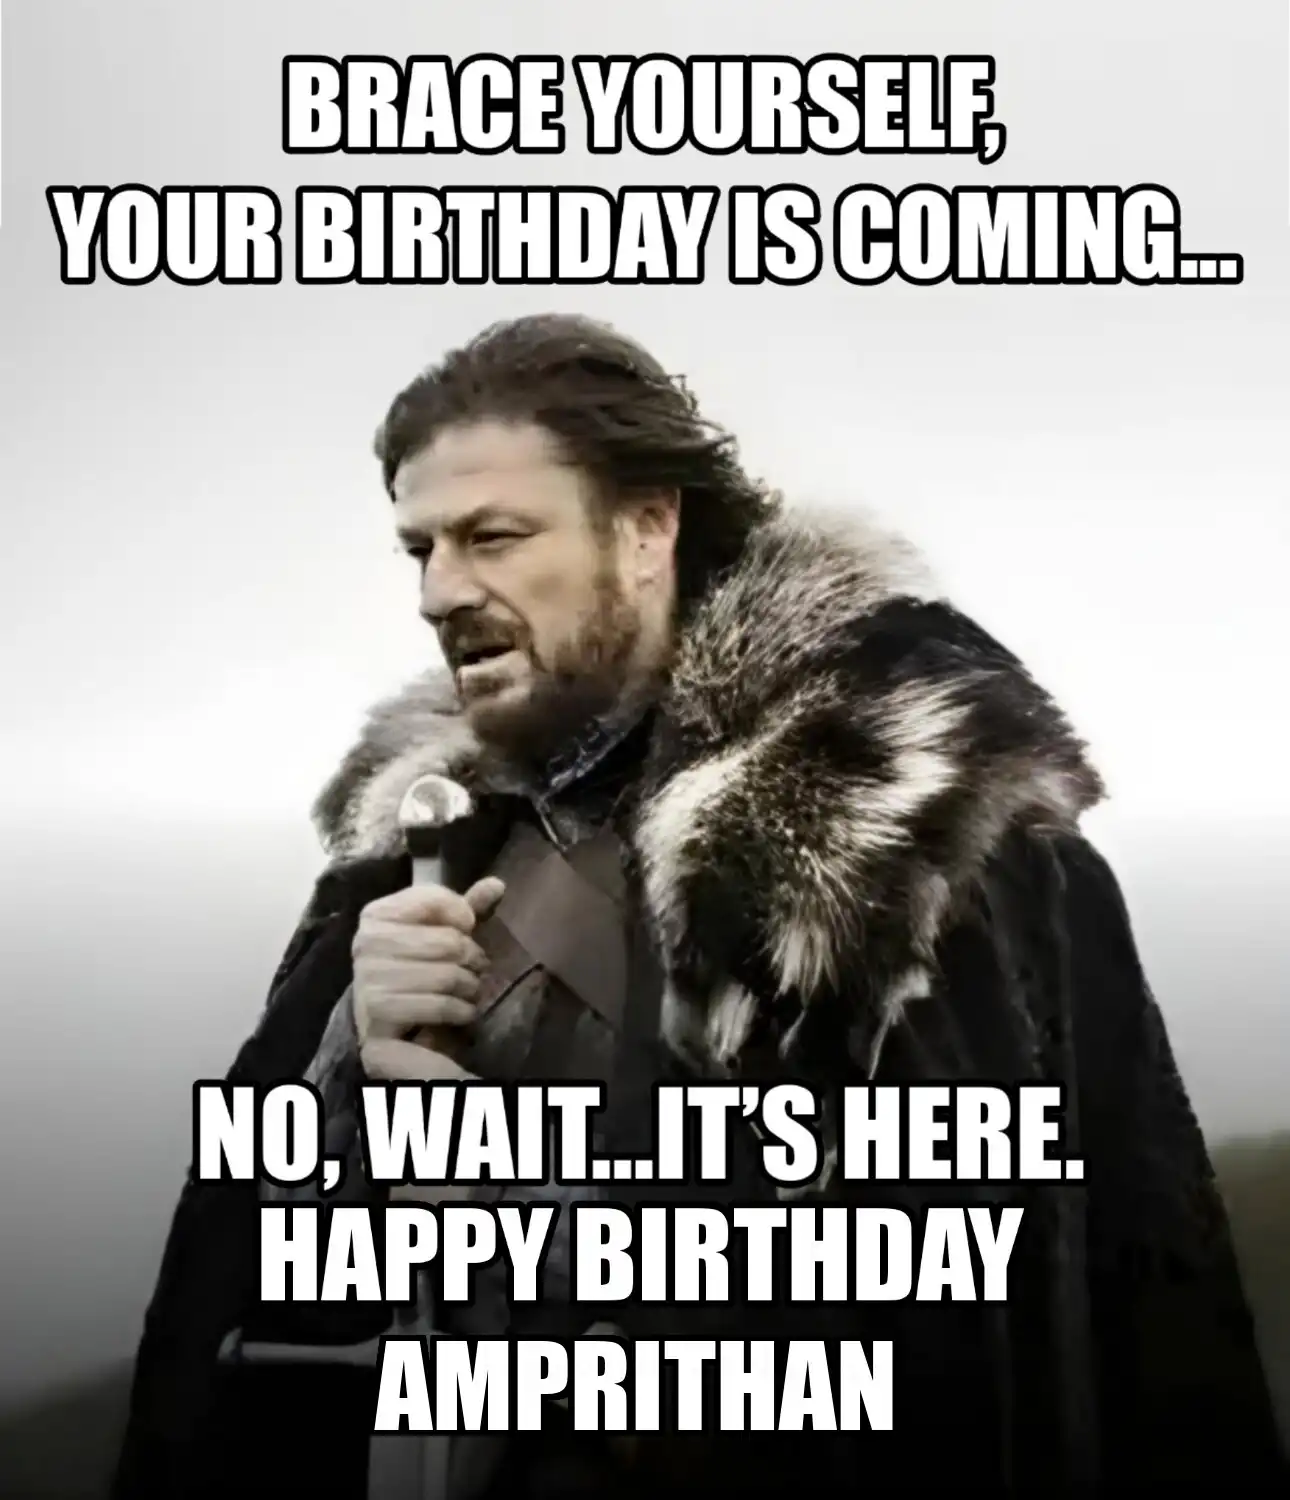 Happy Birthday Amprithan Brace Yourself Your Birthday Is Coming Meme